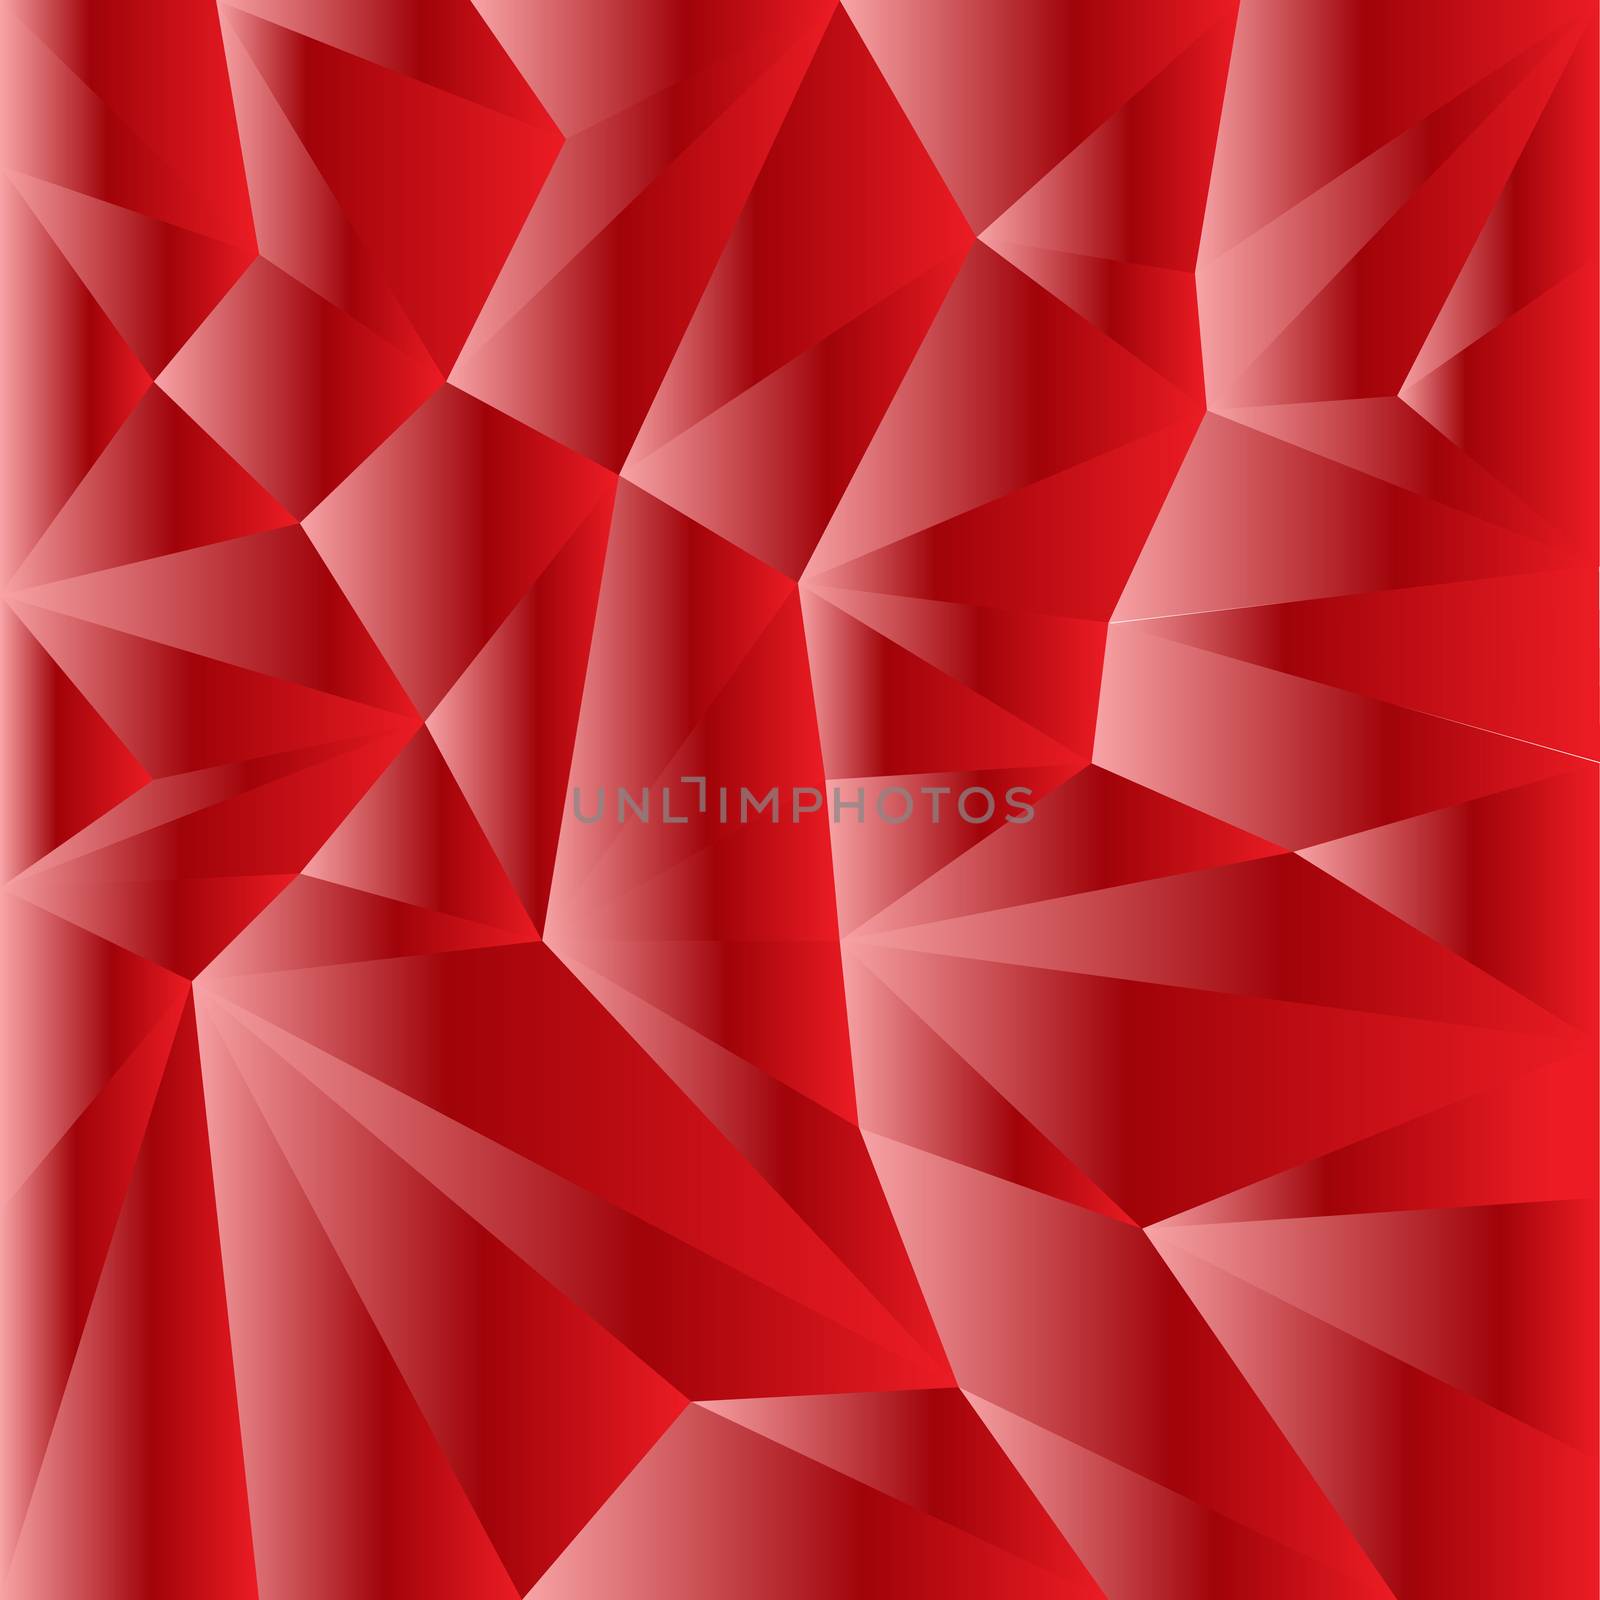 abstract geometric rumpled triangular low poly style vector illustration graphic background by eskimos